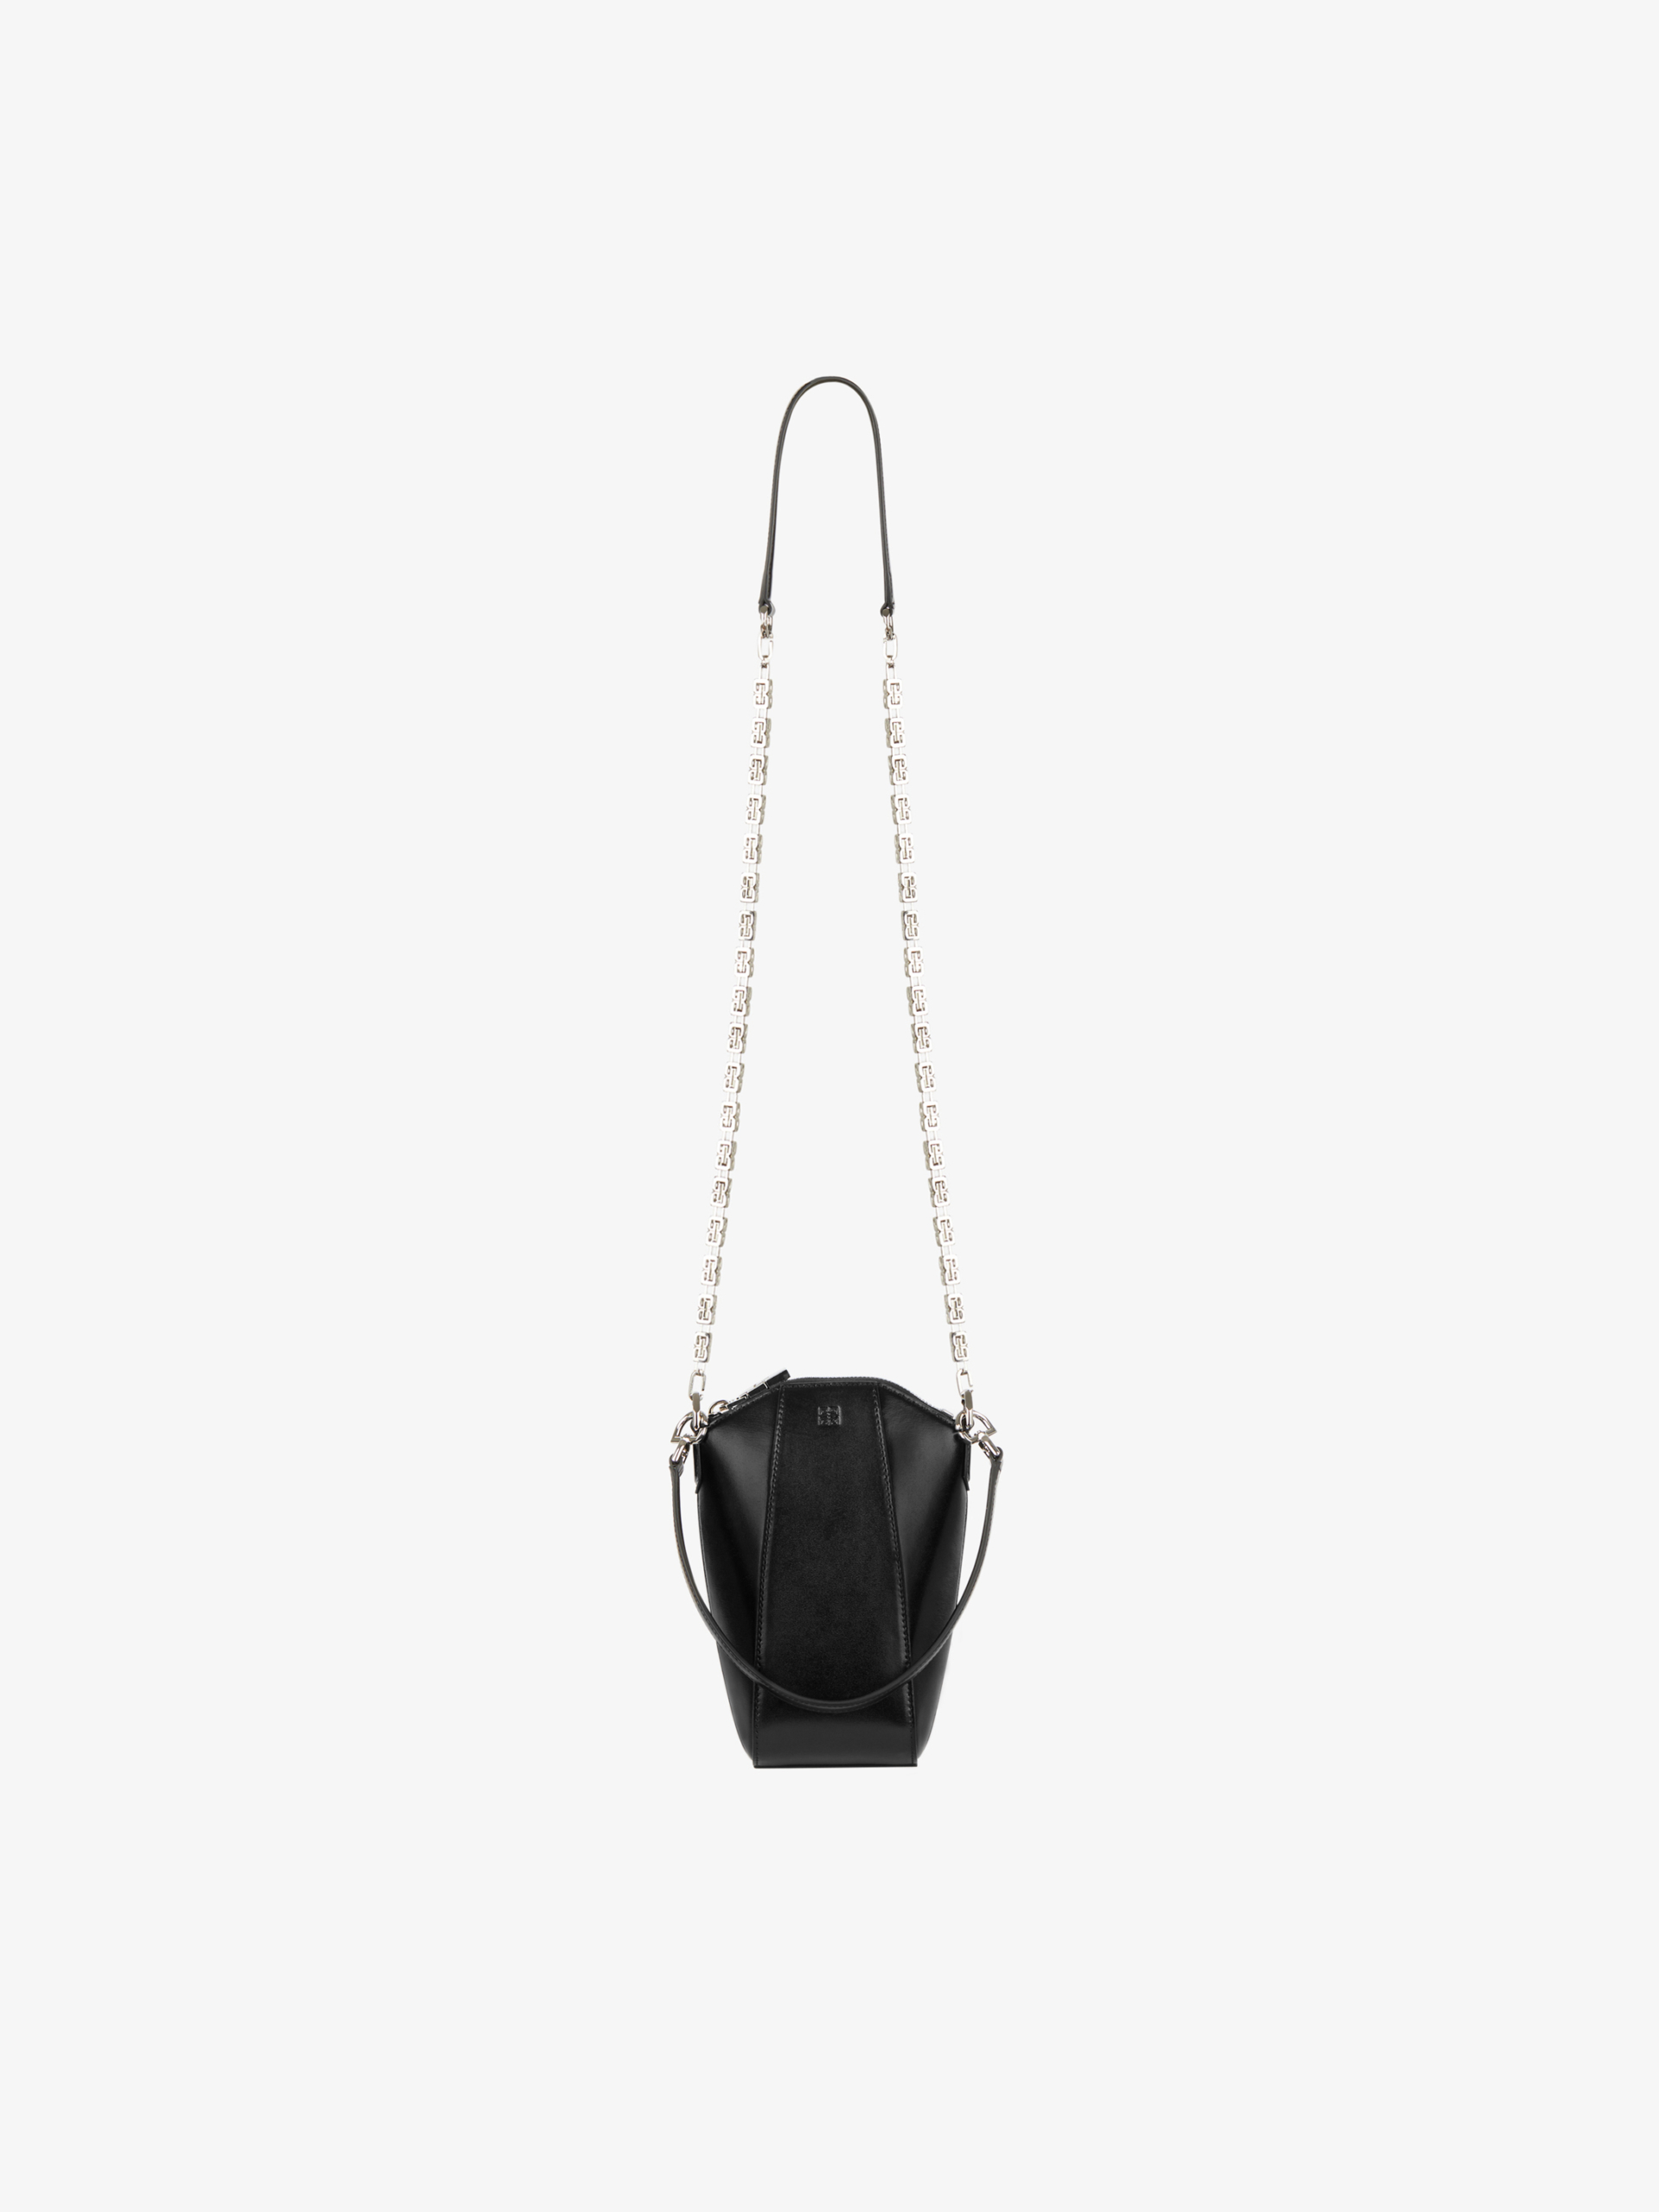 Givenchy's Iconic Handbags Are Reimagined In Sleek Lines And Tantalising  Shades